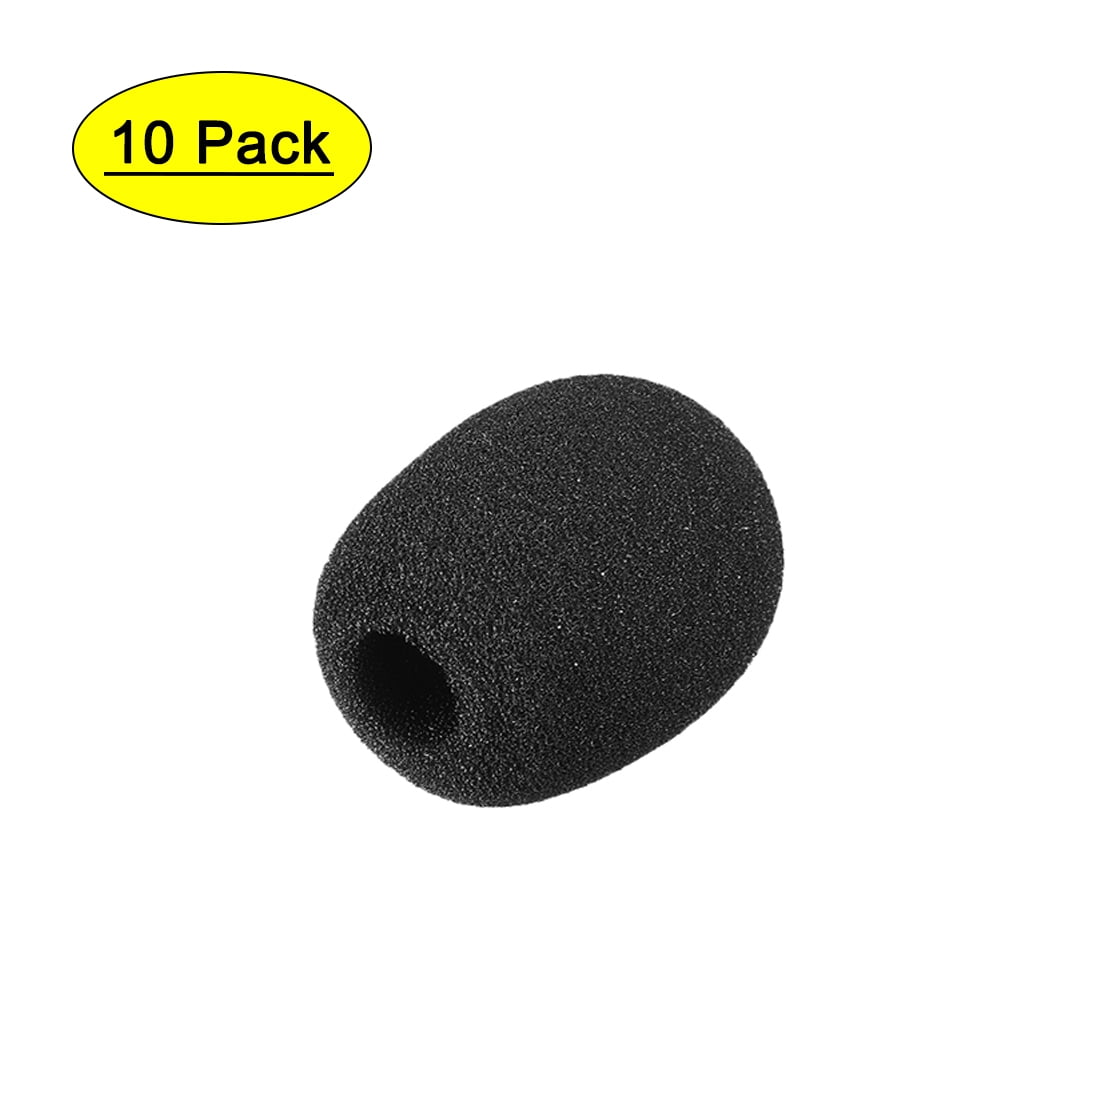 uxcell 10PCS Sponge Foam Mic Cover Handheld Microphone Windscreen Shield Protection Green for KTV Broadcasting